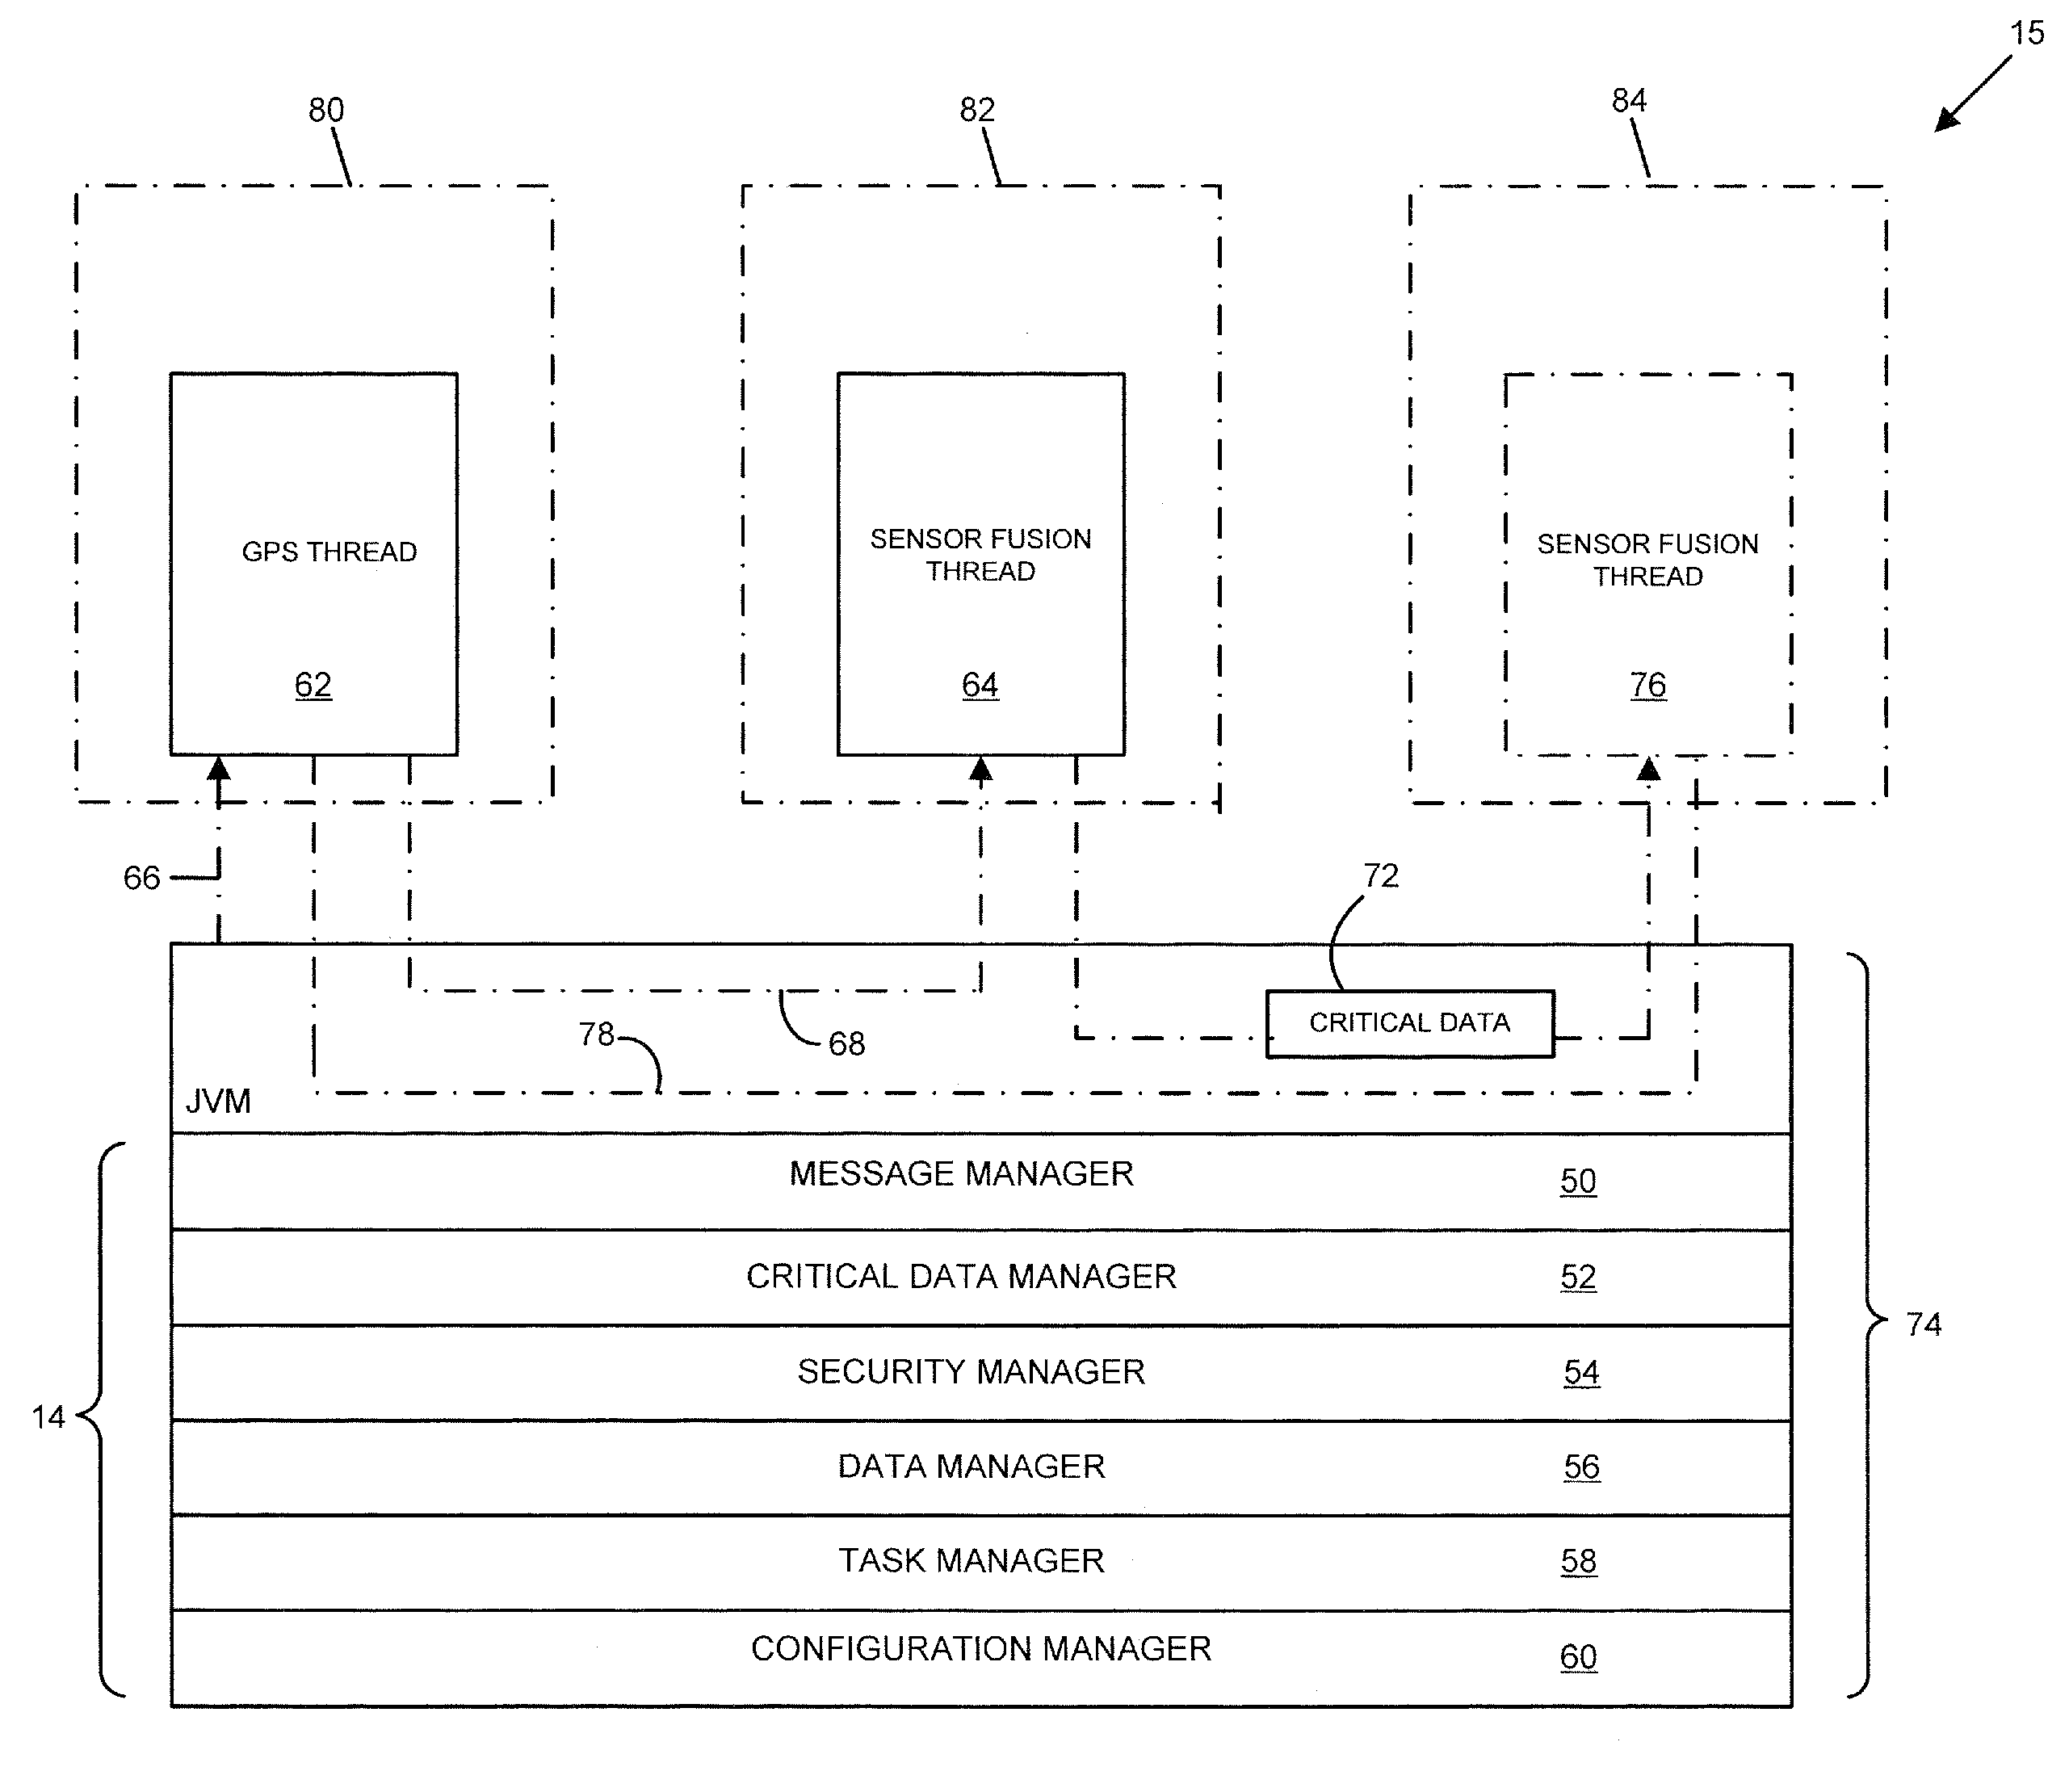 Method for multi-tasking multiple Java virtual machines in a secure environment